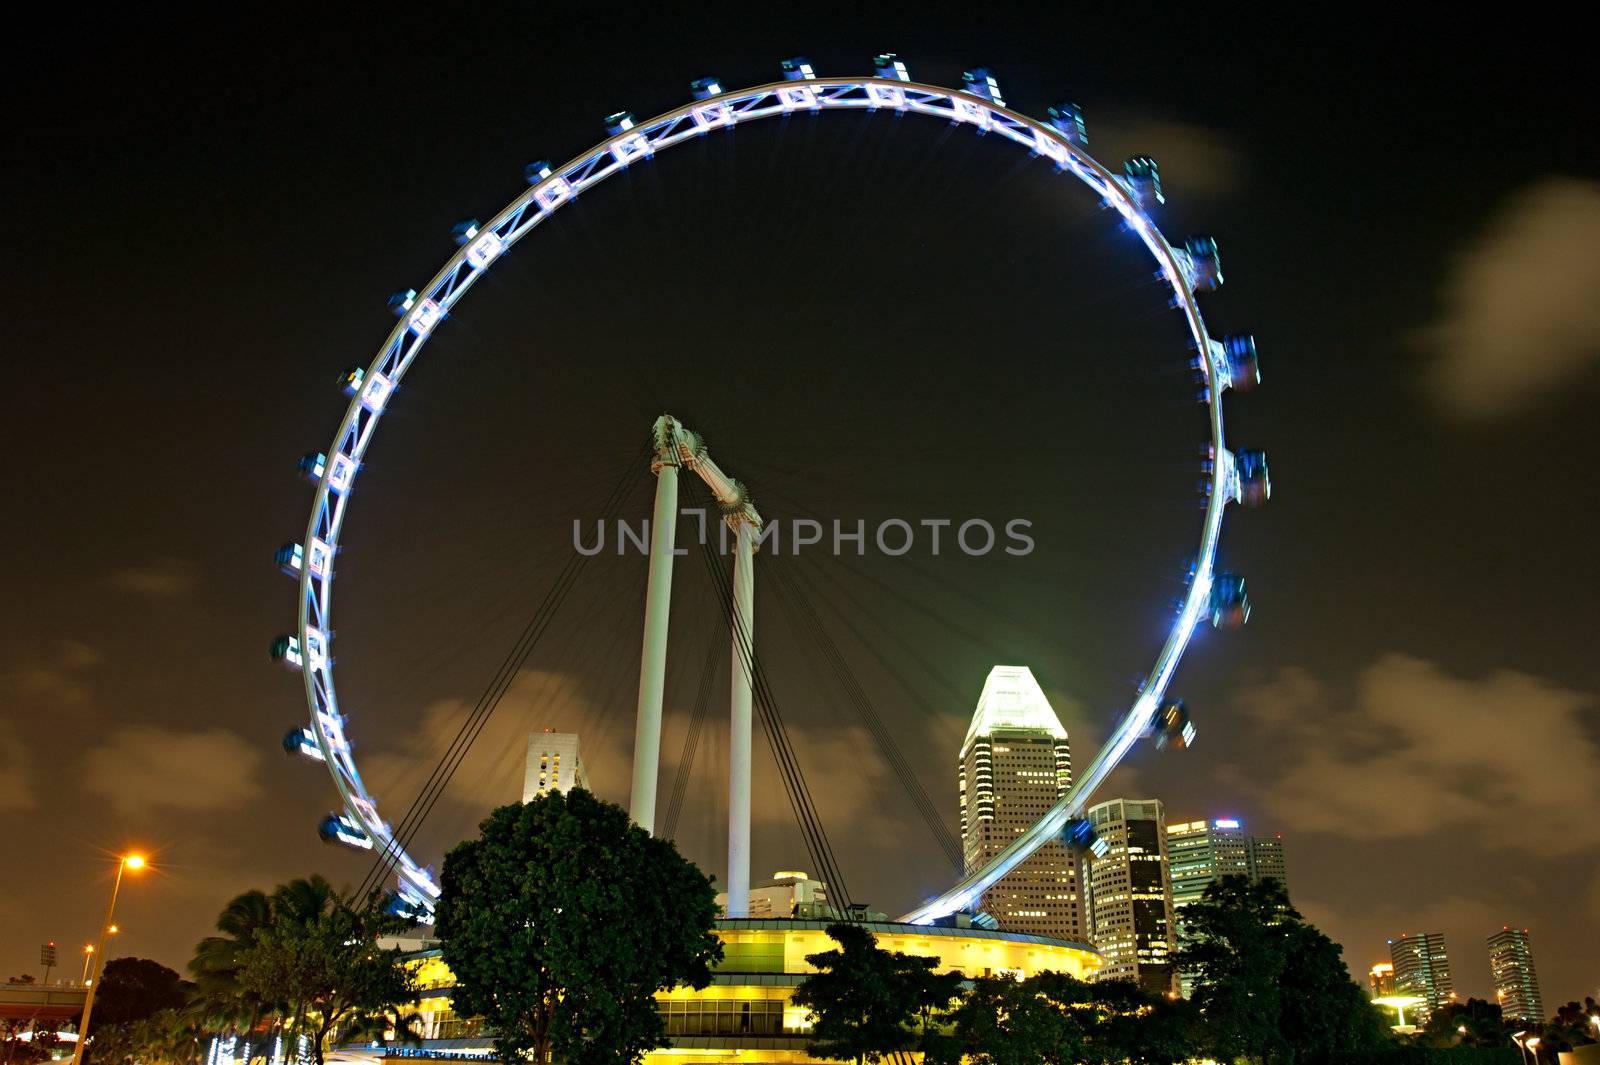 Singapore Flyer at night - the Largest Ferris Wheel in the World.